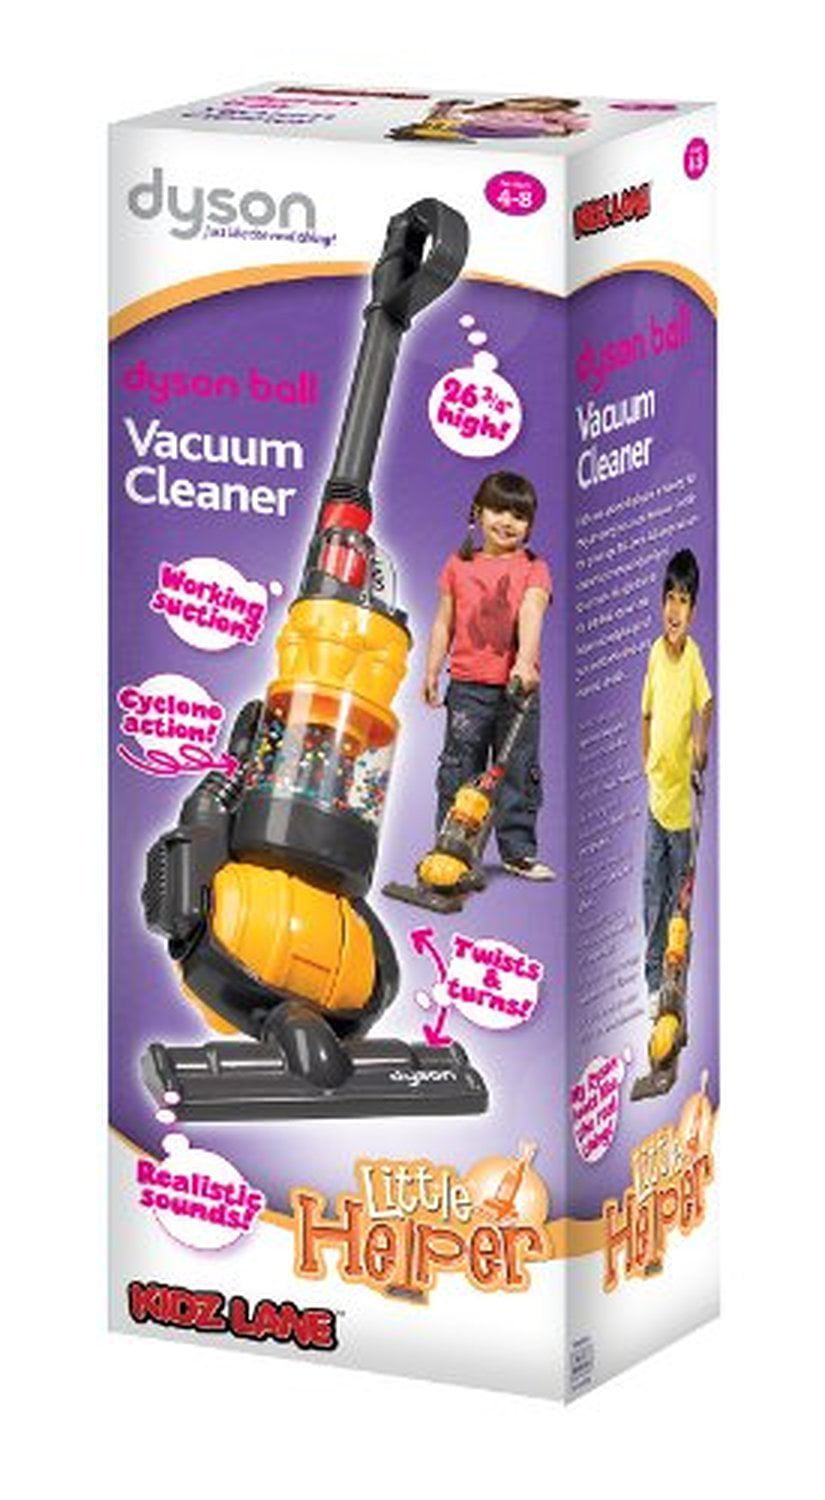 Toy Vacuum- Dyson With Real Suction and Sounds - Walmart.com